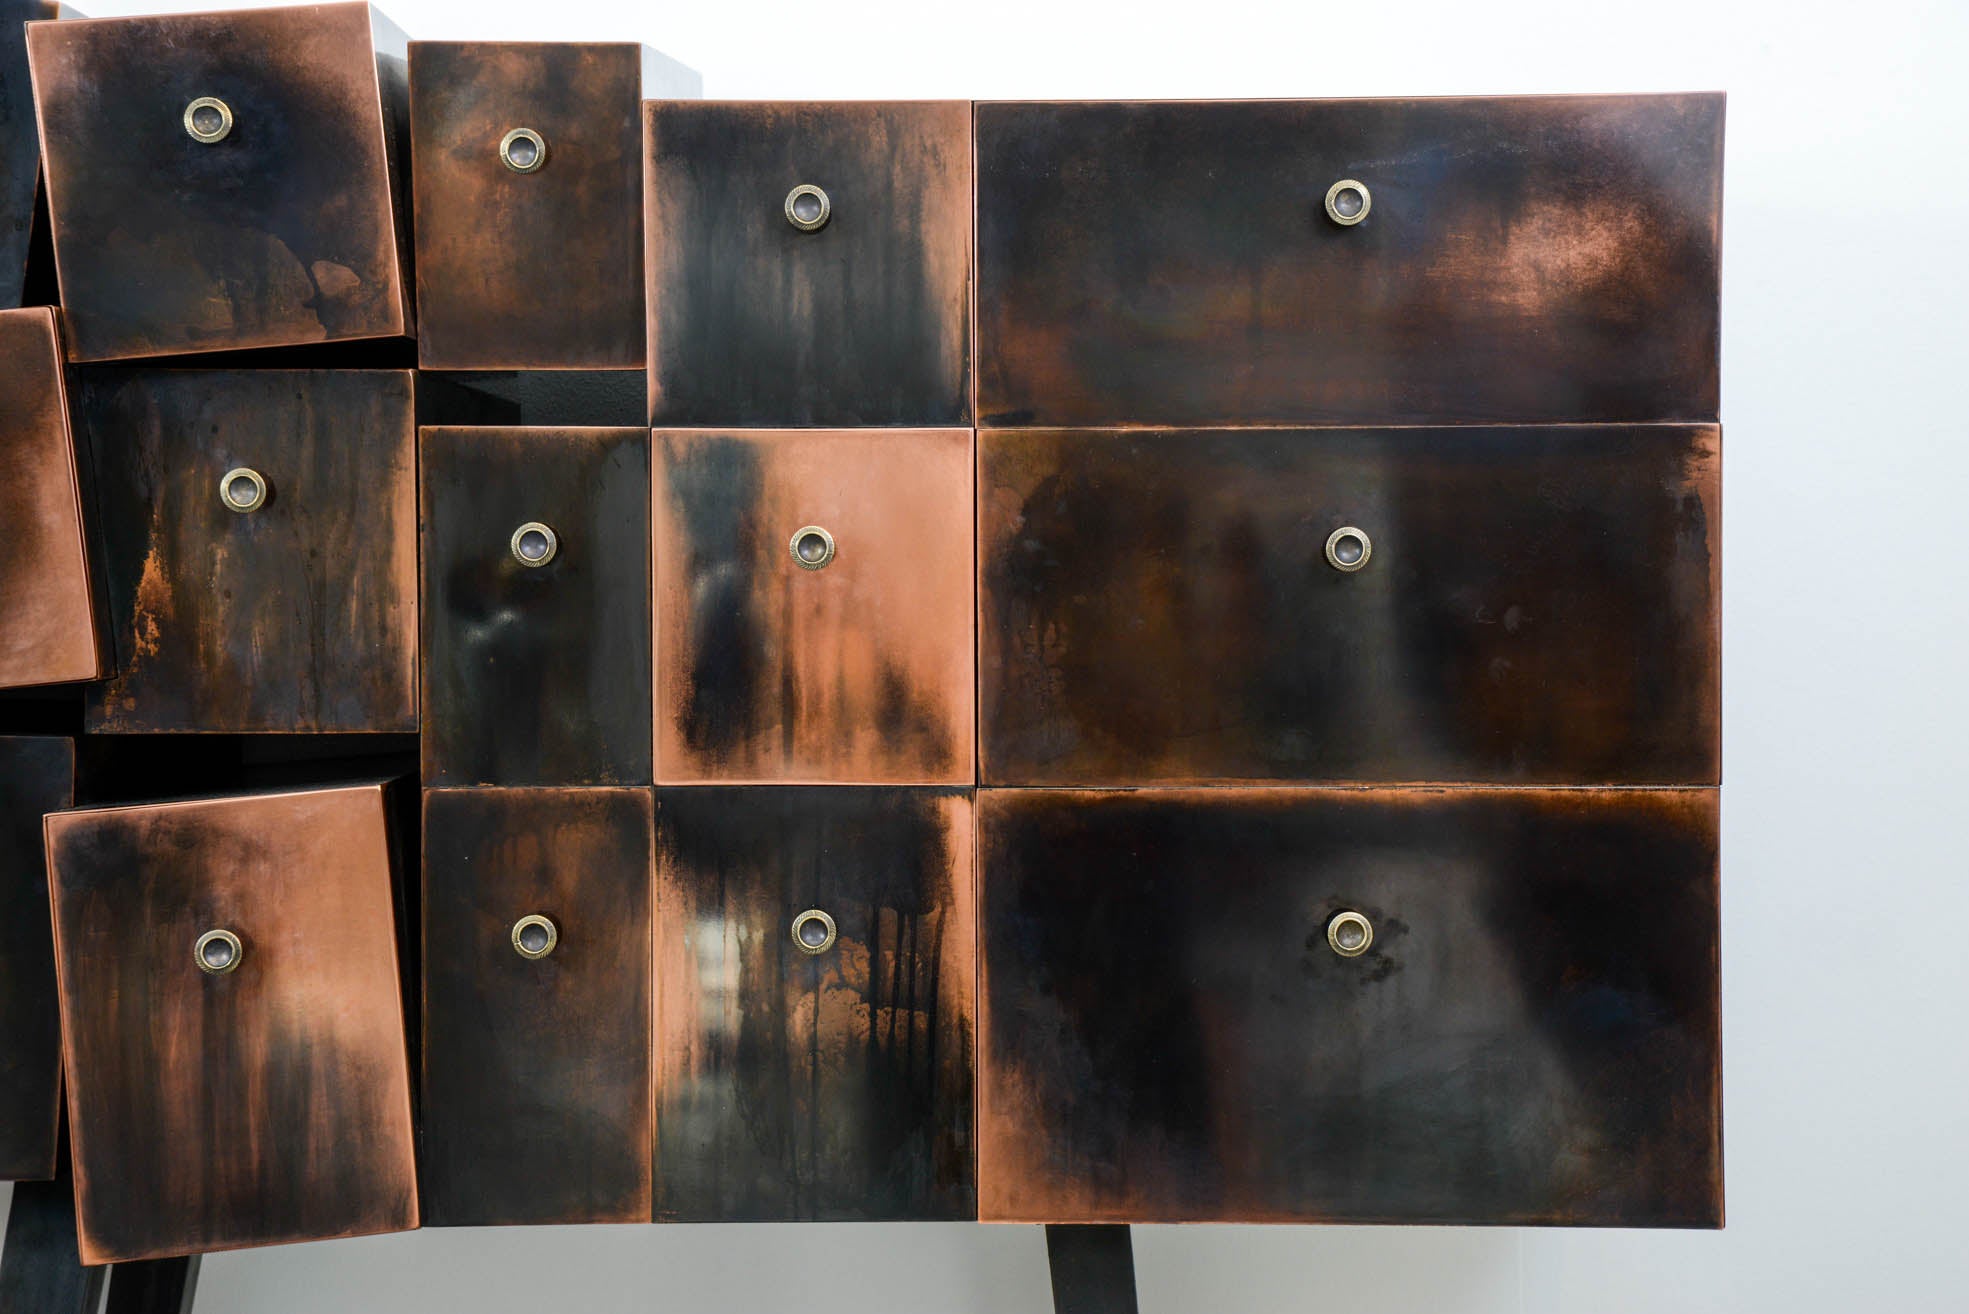 Deconstructed copper cabinet, one door, three front drawers, two side drawers, basement in metal
signed and dated by the artist Erwan Boulloud.